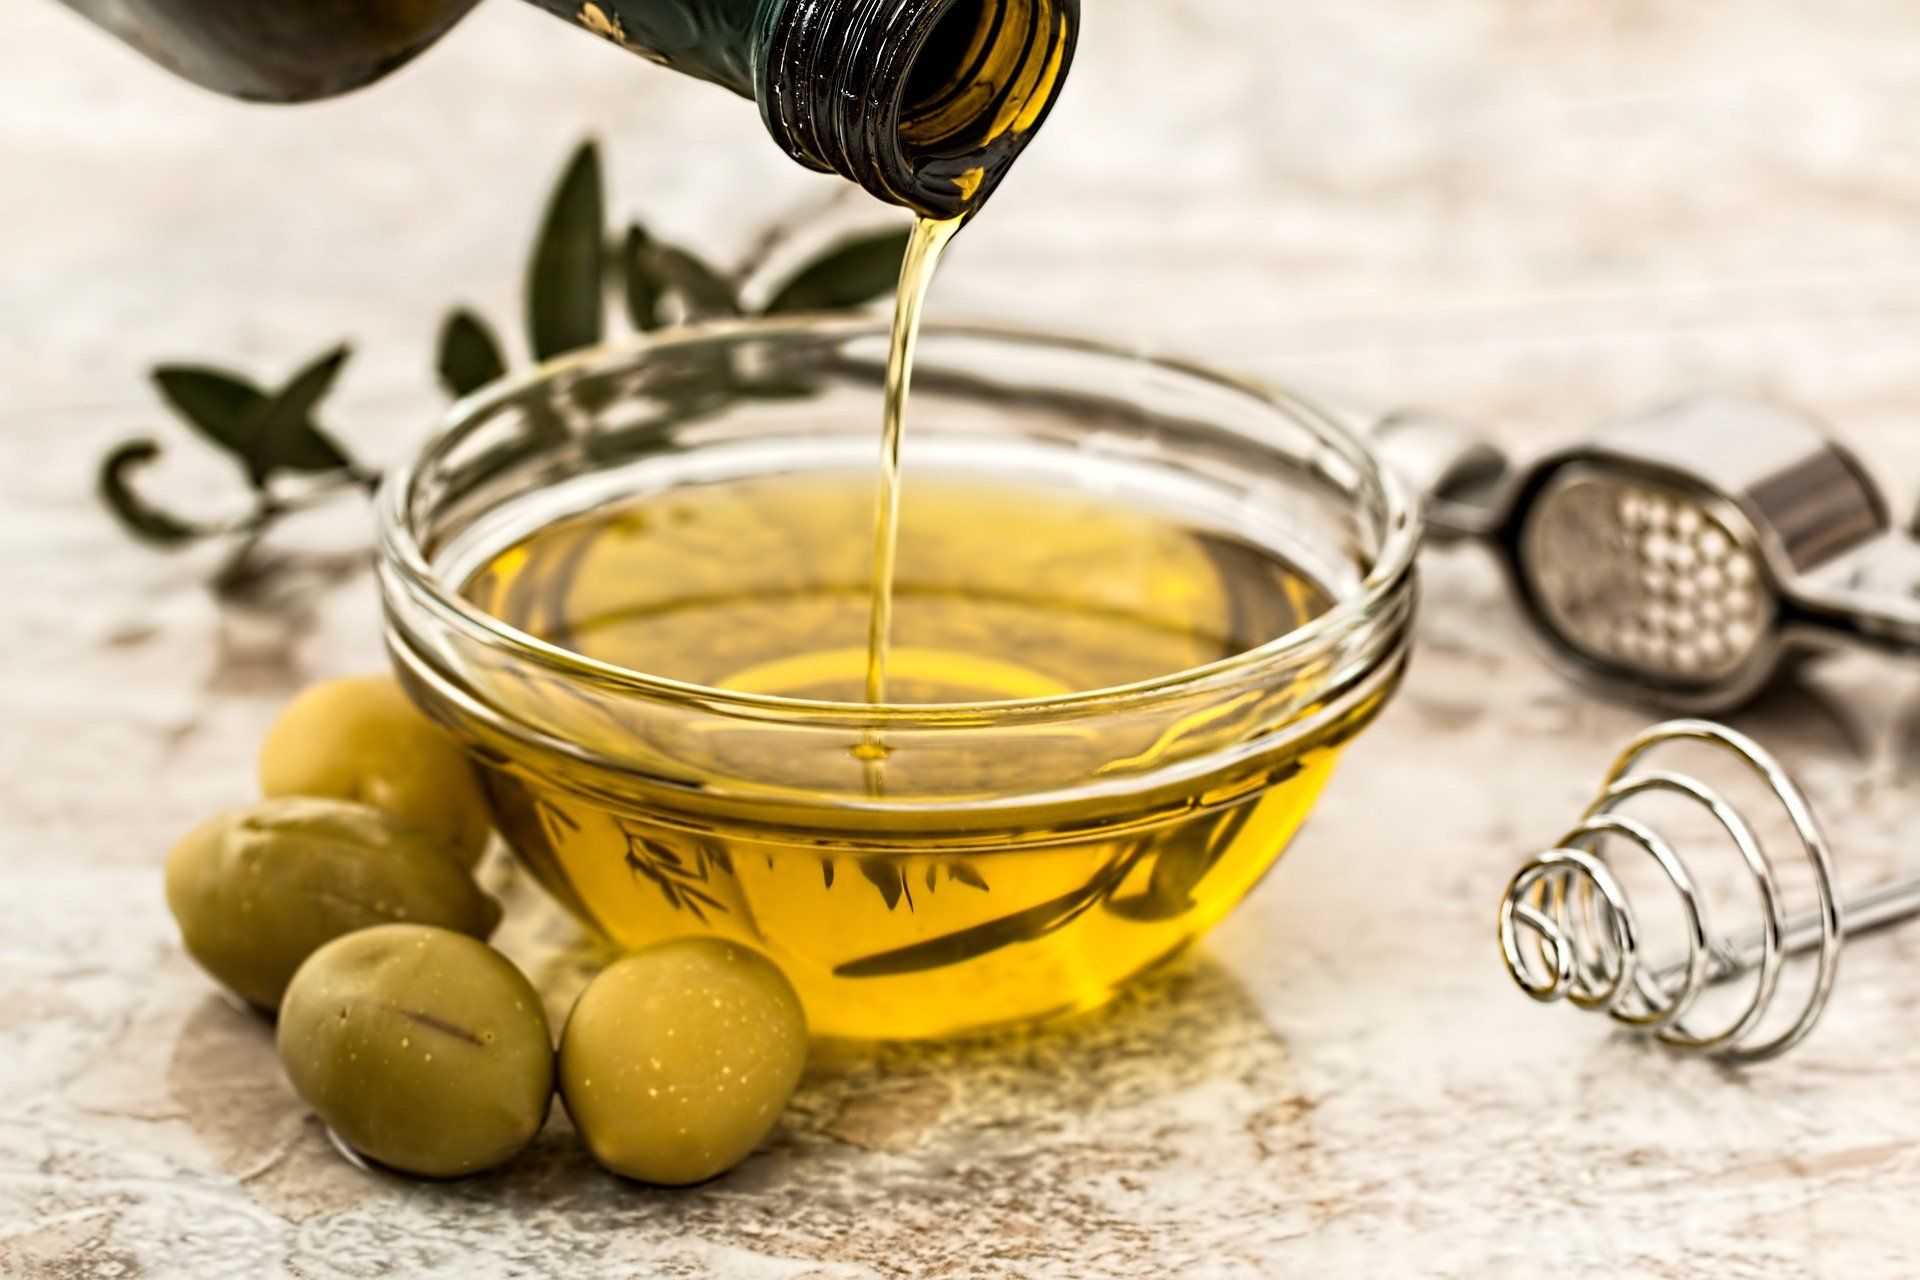 A bowl with olive oil in it